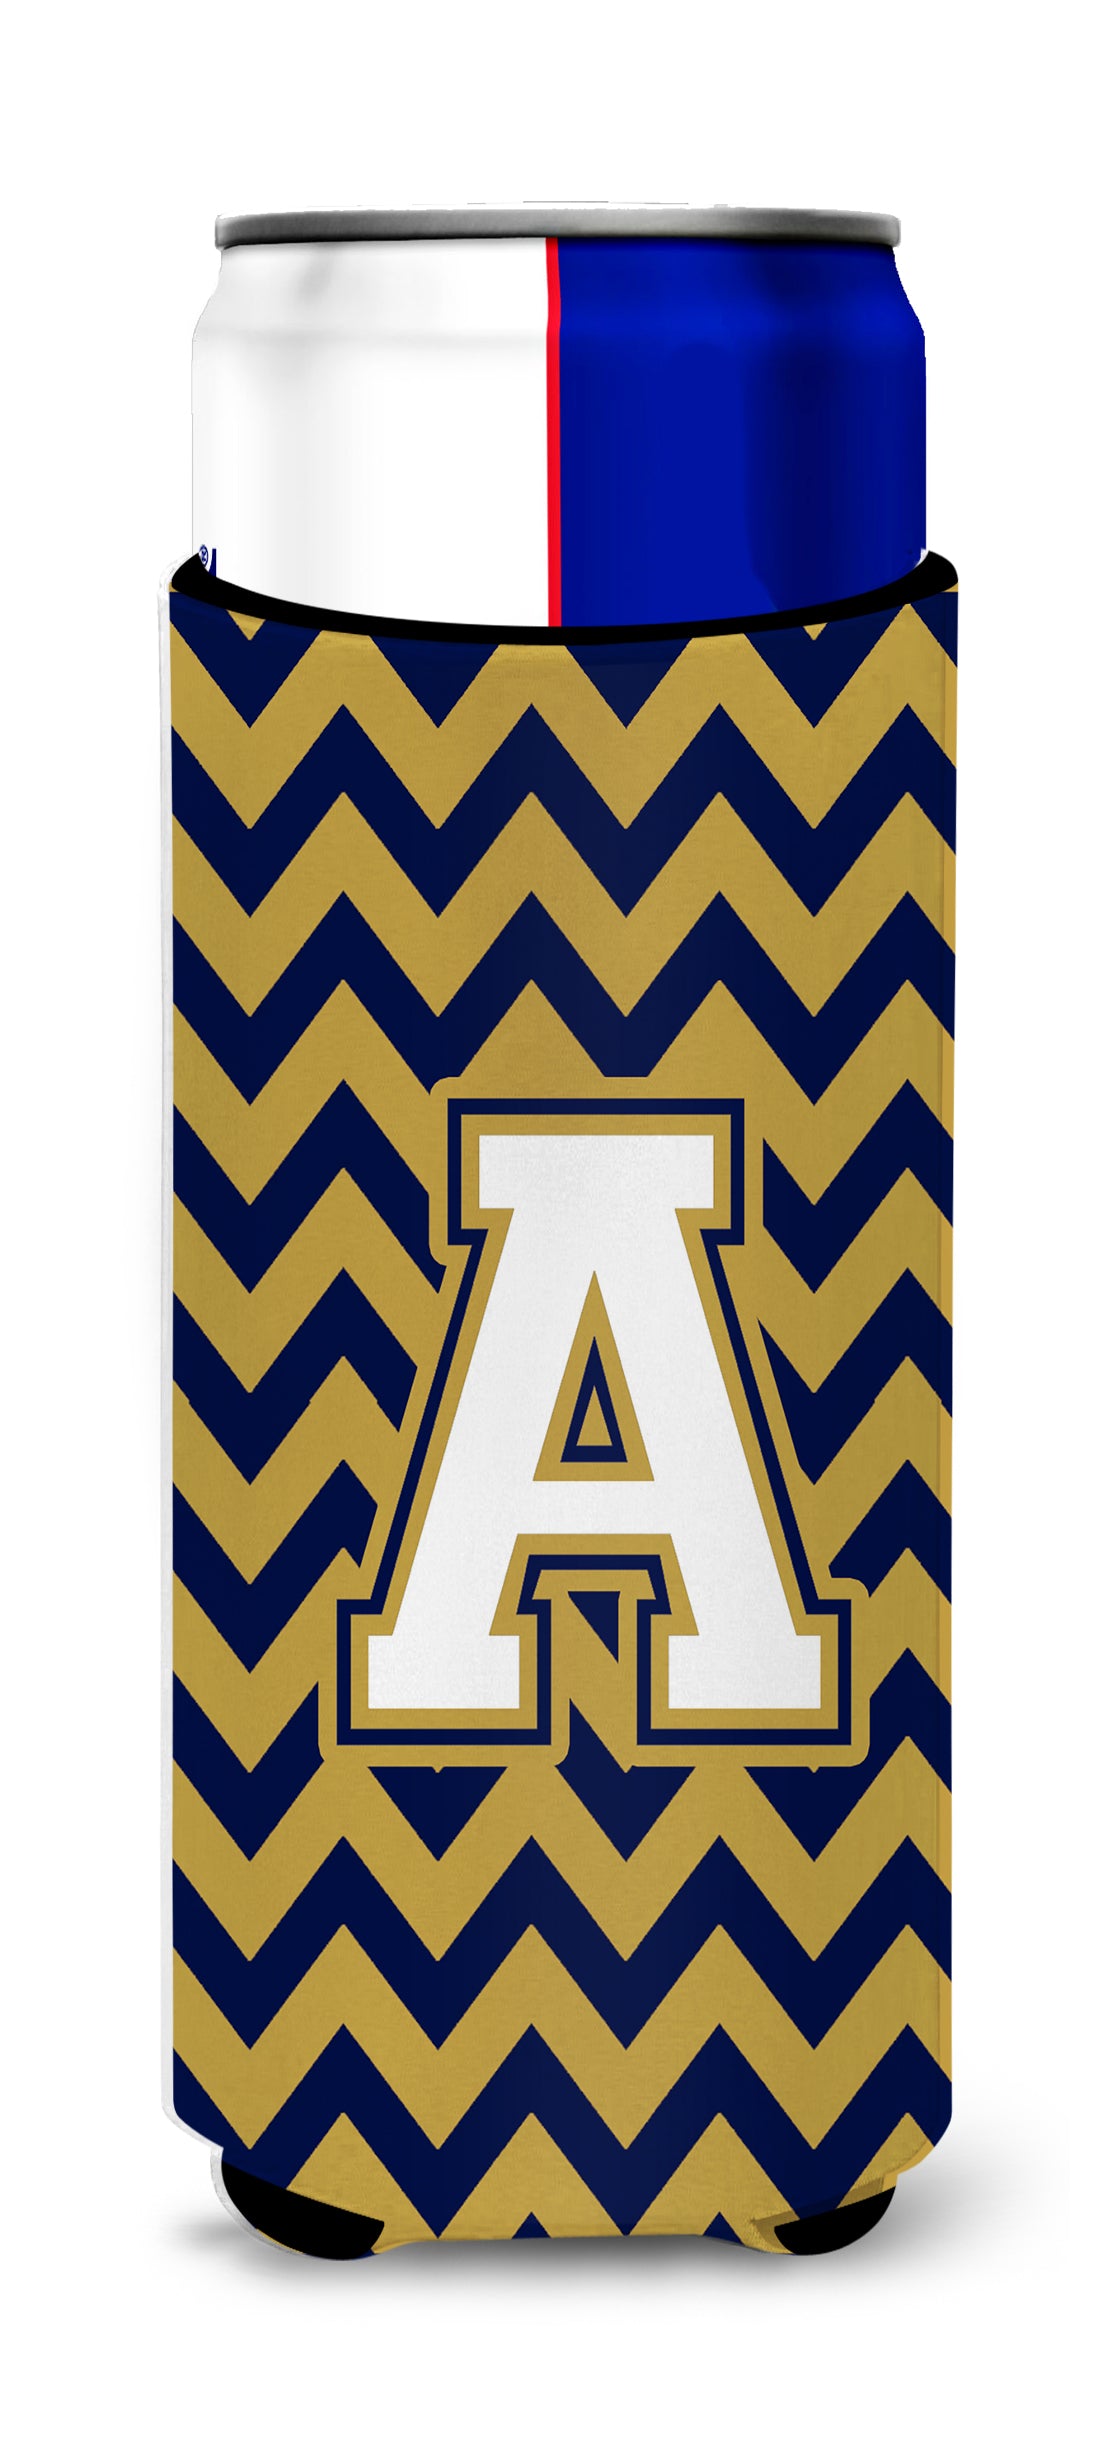 Letter A Chevron Navy Blue and Gold Ultra Beverage Insulators for slim cans CJ1057-AMUK.